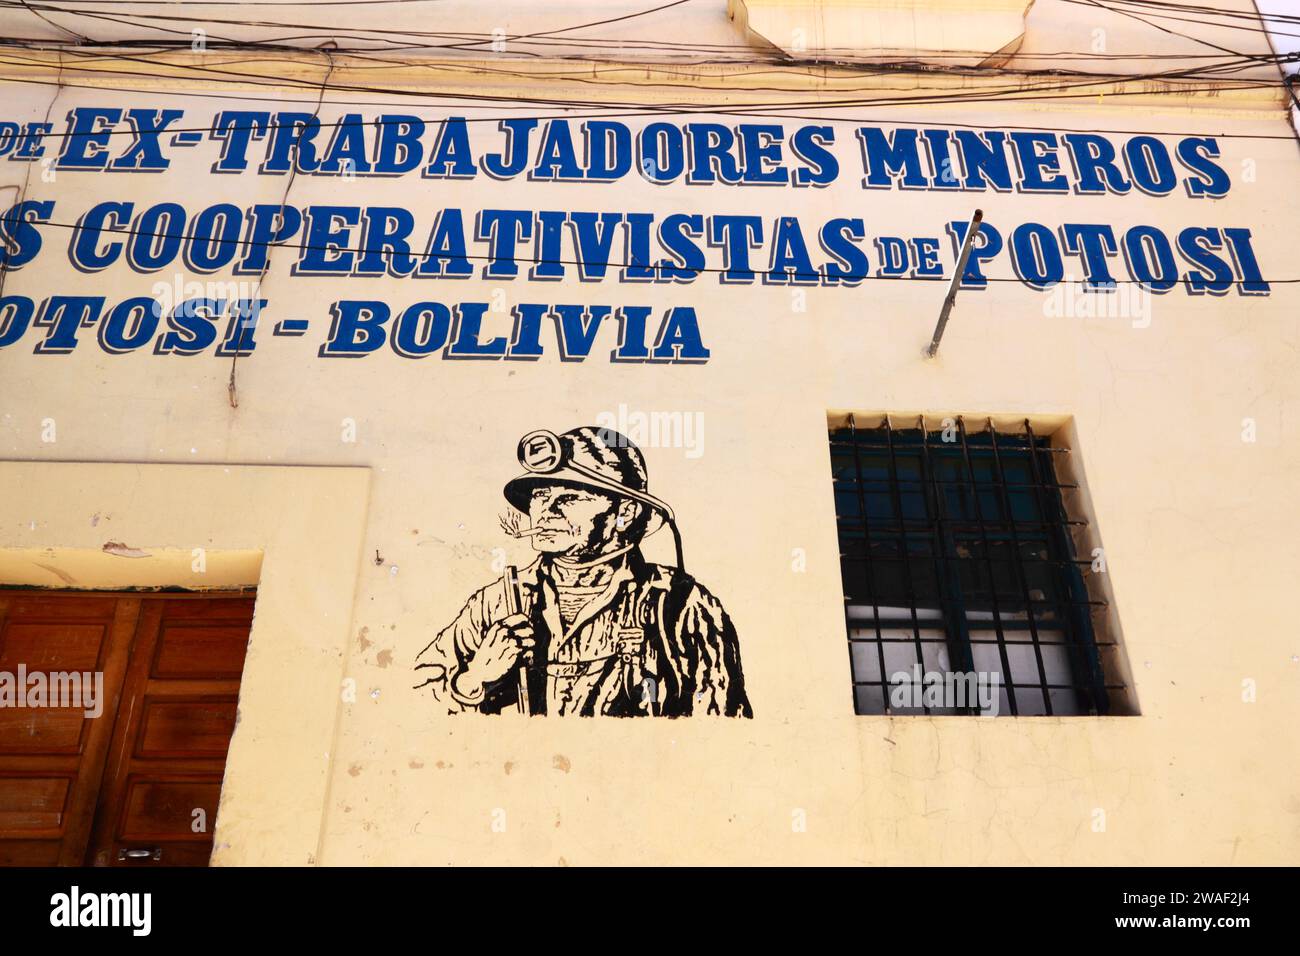 Stencil art portrait of a miner painted on the wall of a retired cooperative mine workers trade union office, Potosi, Bolivia Stock Photo